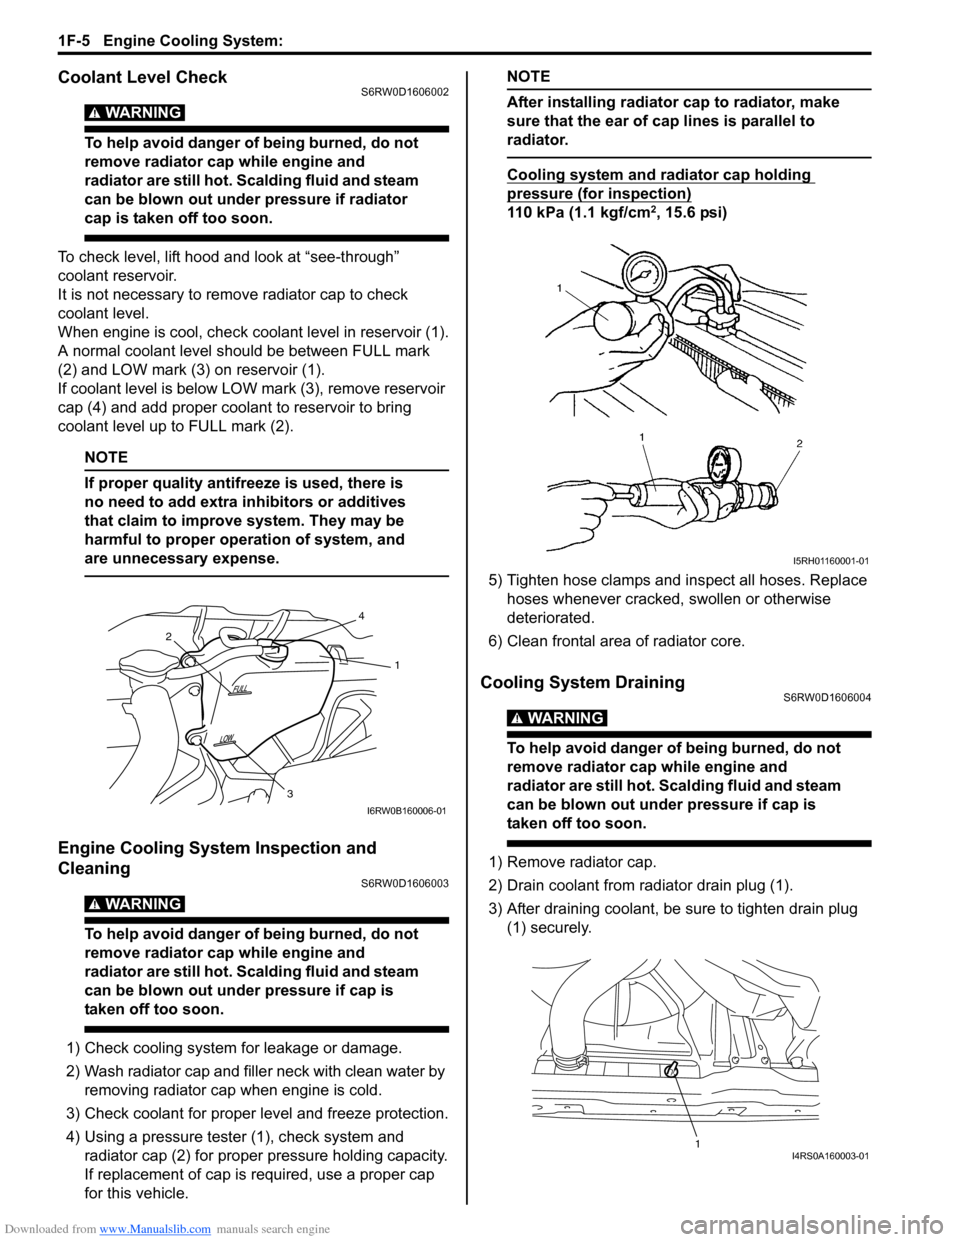 SUZUKI SX4 2006 1.G Service Workshop Manual Downloaded from www.Manualslib.com manuals search engine 1F-5 Engine Cooling System: 
Coolant Level CheckS6RW0D1606002
WARNING! 
To help avoid danger of being burned, do not 
remove radiator cap while